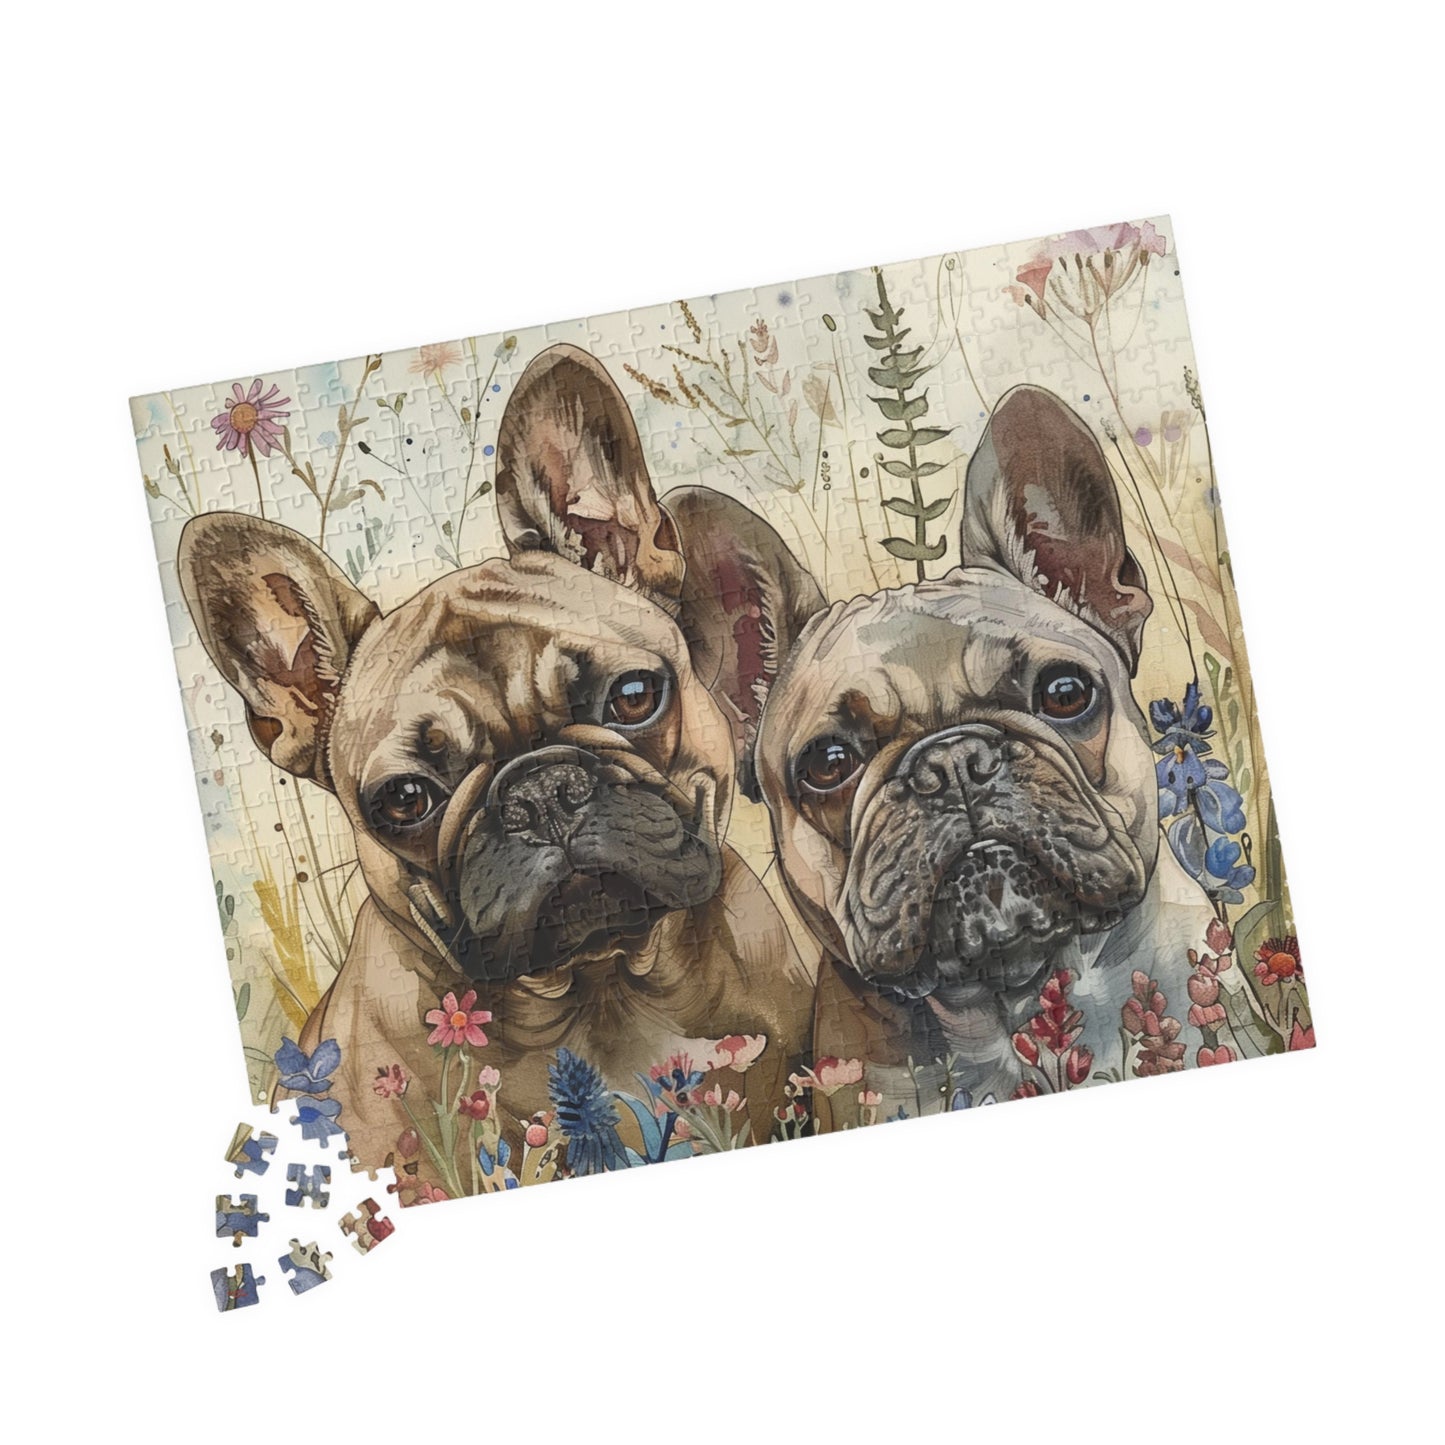 French Bulldog Pups Puzzle in Wildflowers (110, 252, 520, 1014-piece) Wildflowers Watercolor Jig Saw Family Pet K9 Canine Friend Buddy Tabletop Game 1000 500